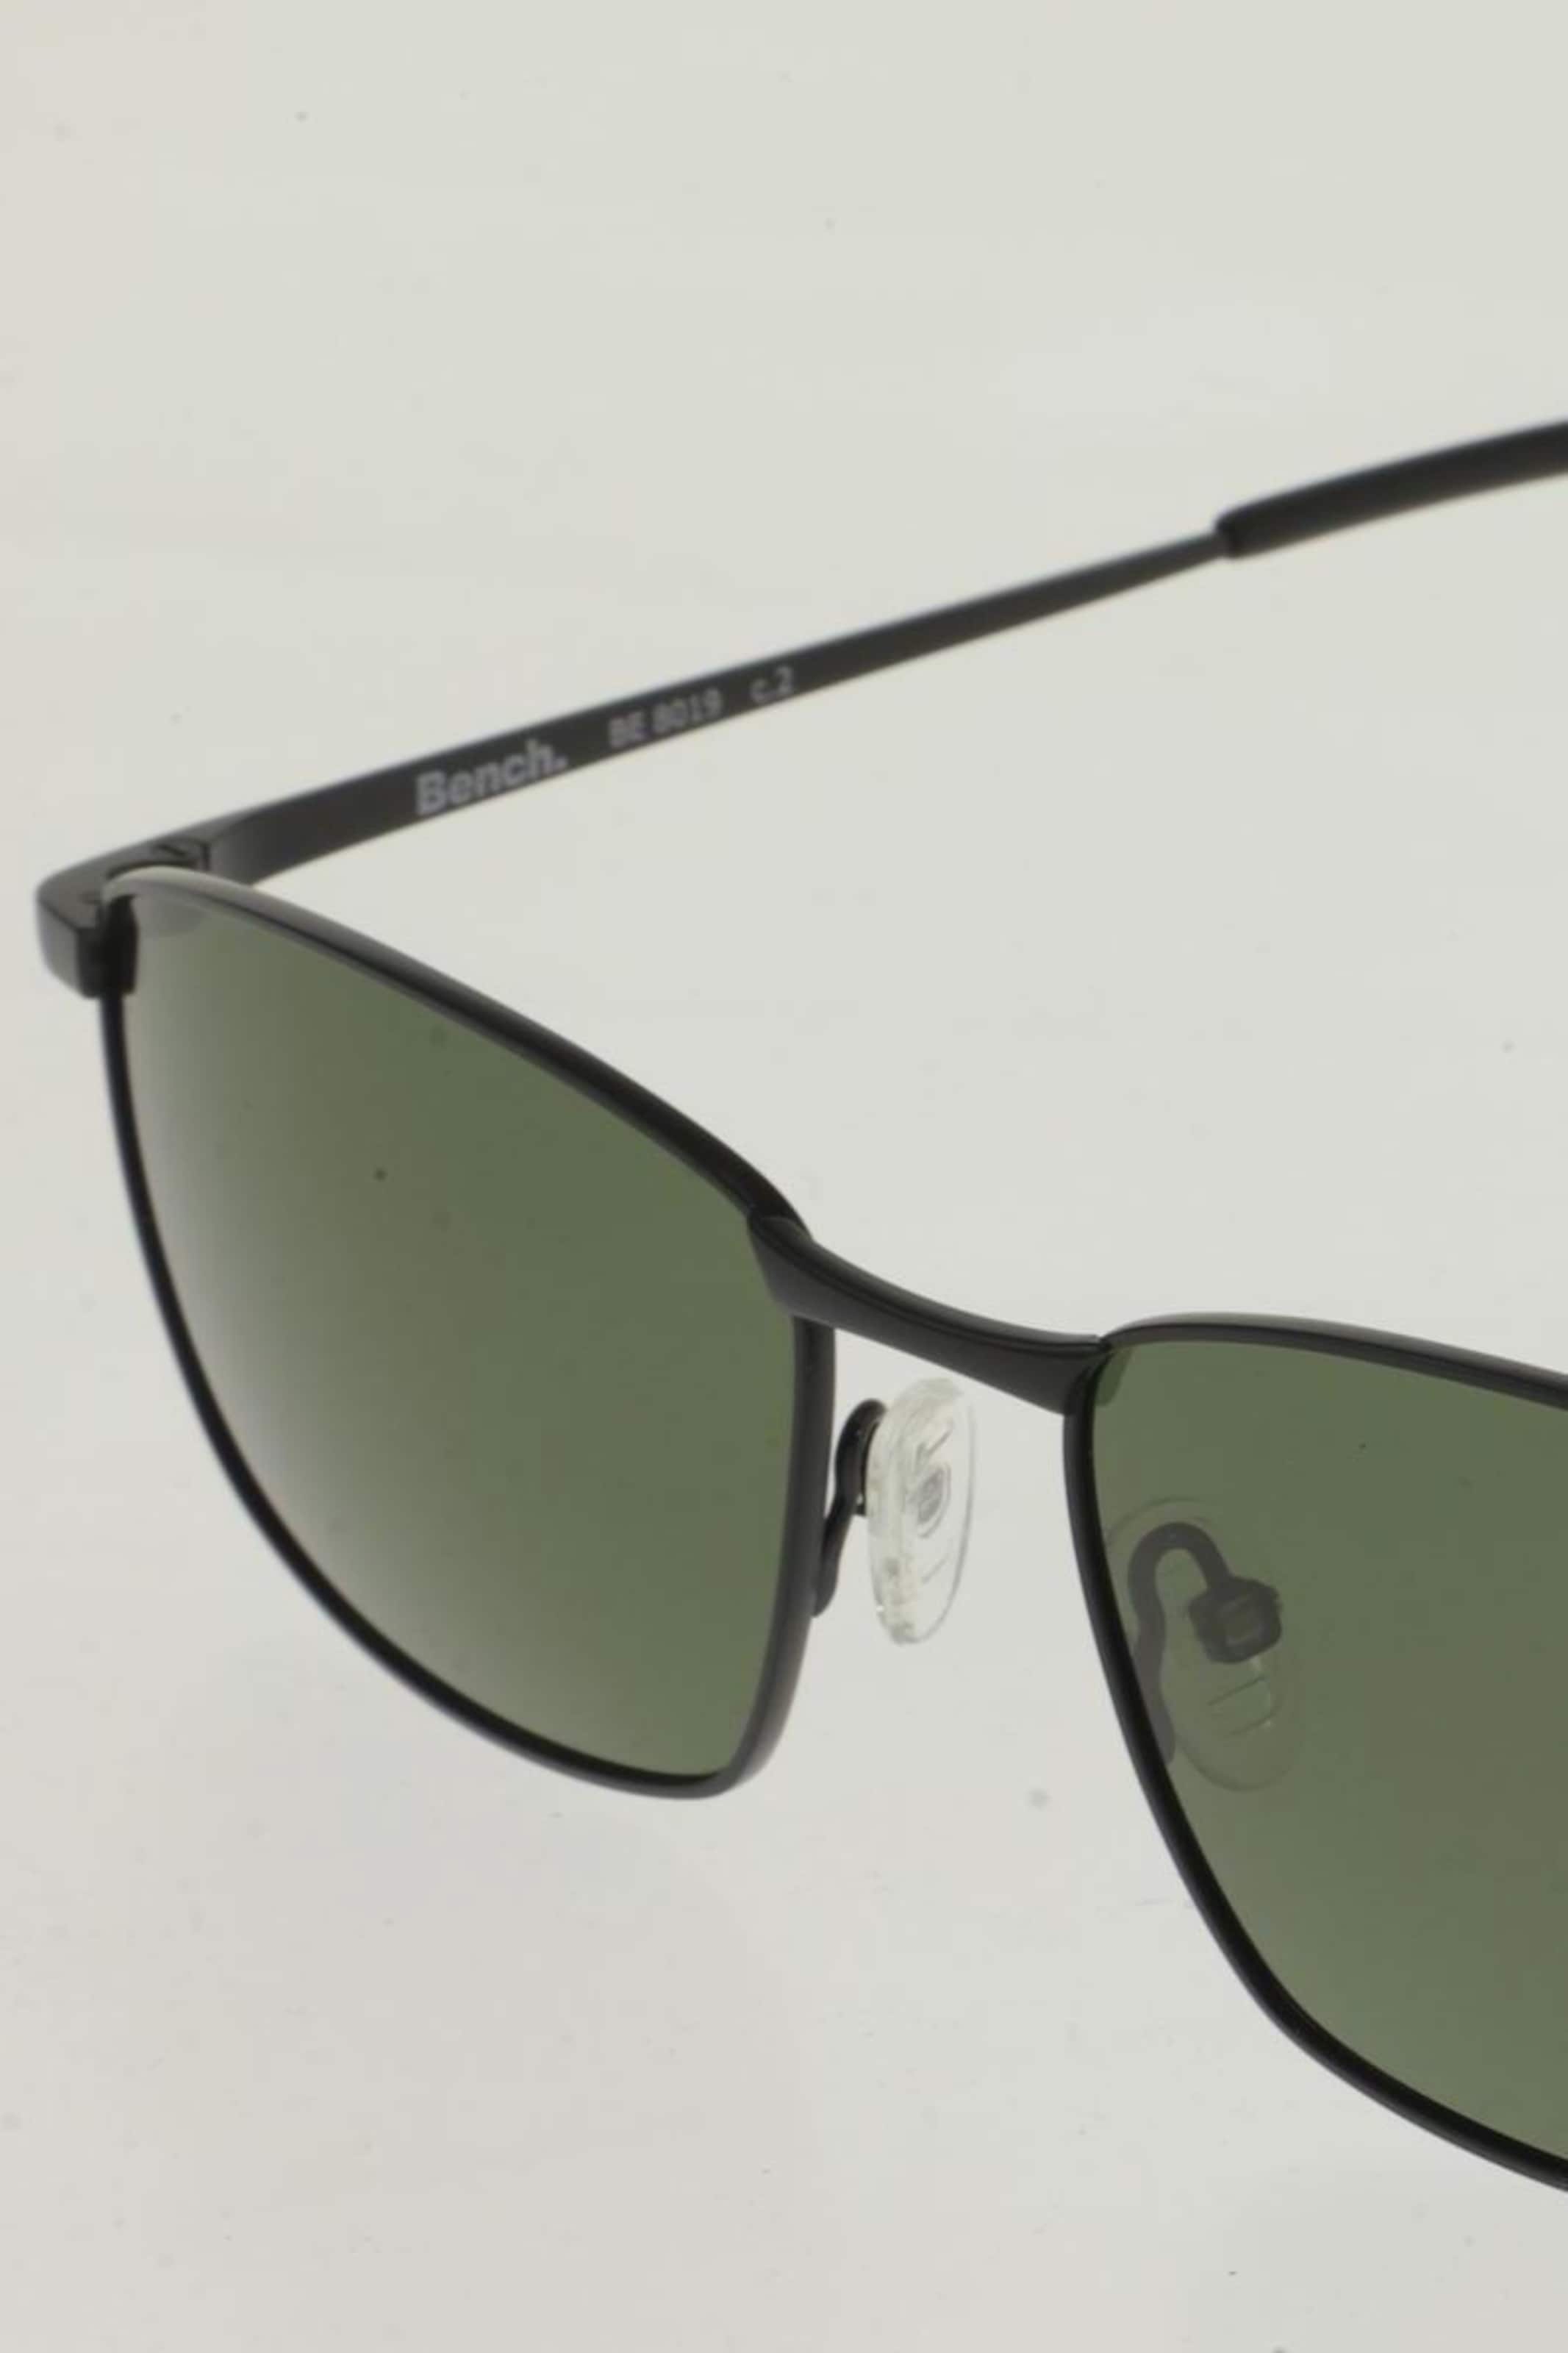 BENCH Sunglasses in One YOU Black | ABOUT size in